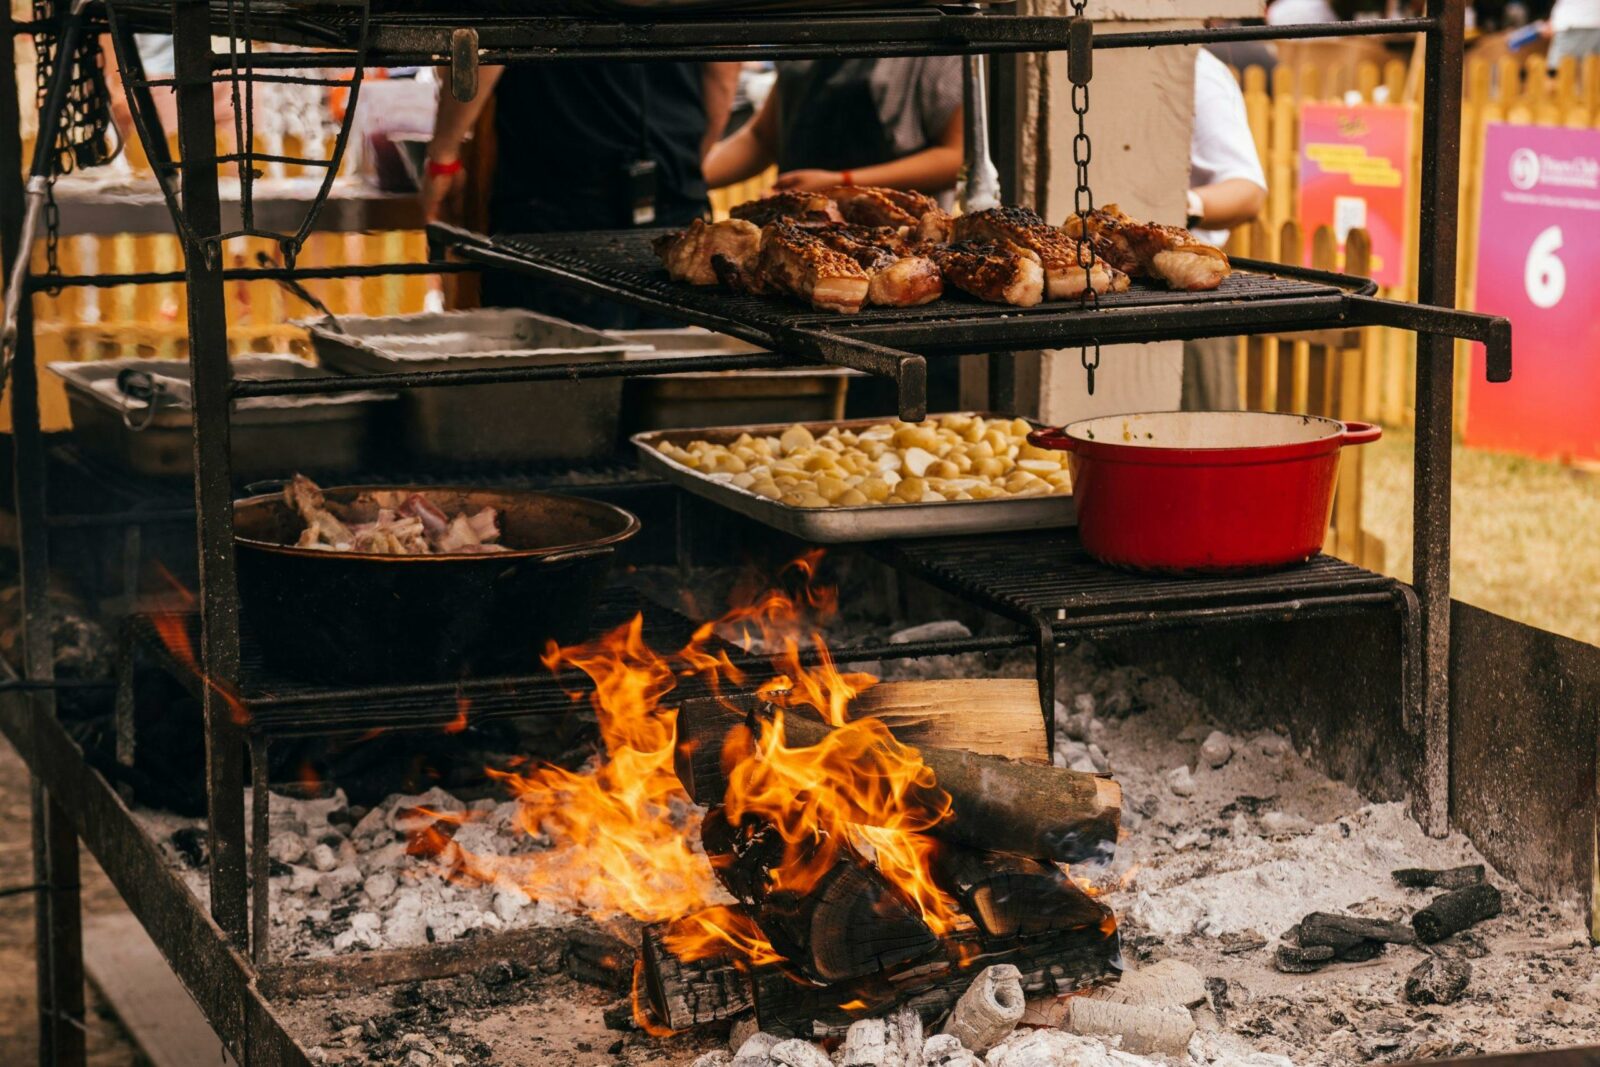 Cooking food over fire at a live open outdoor event